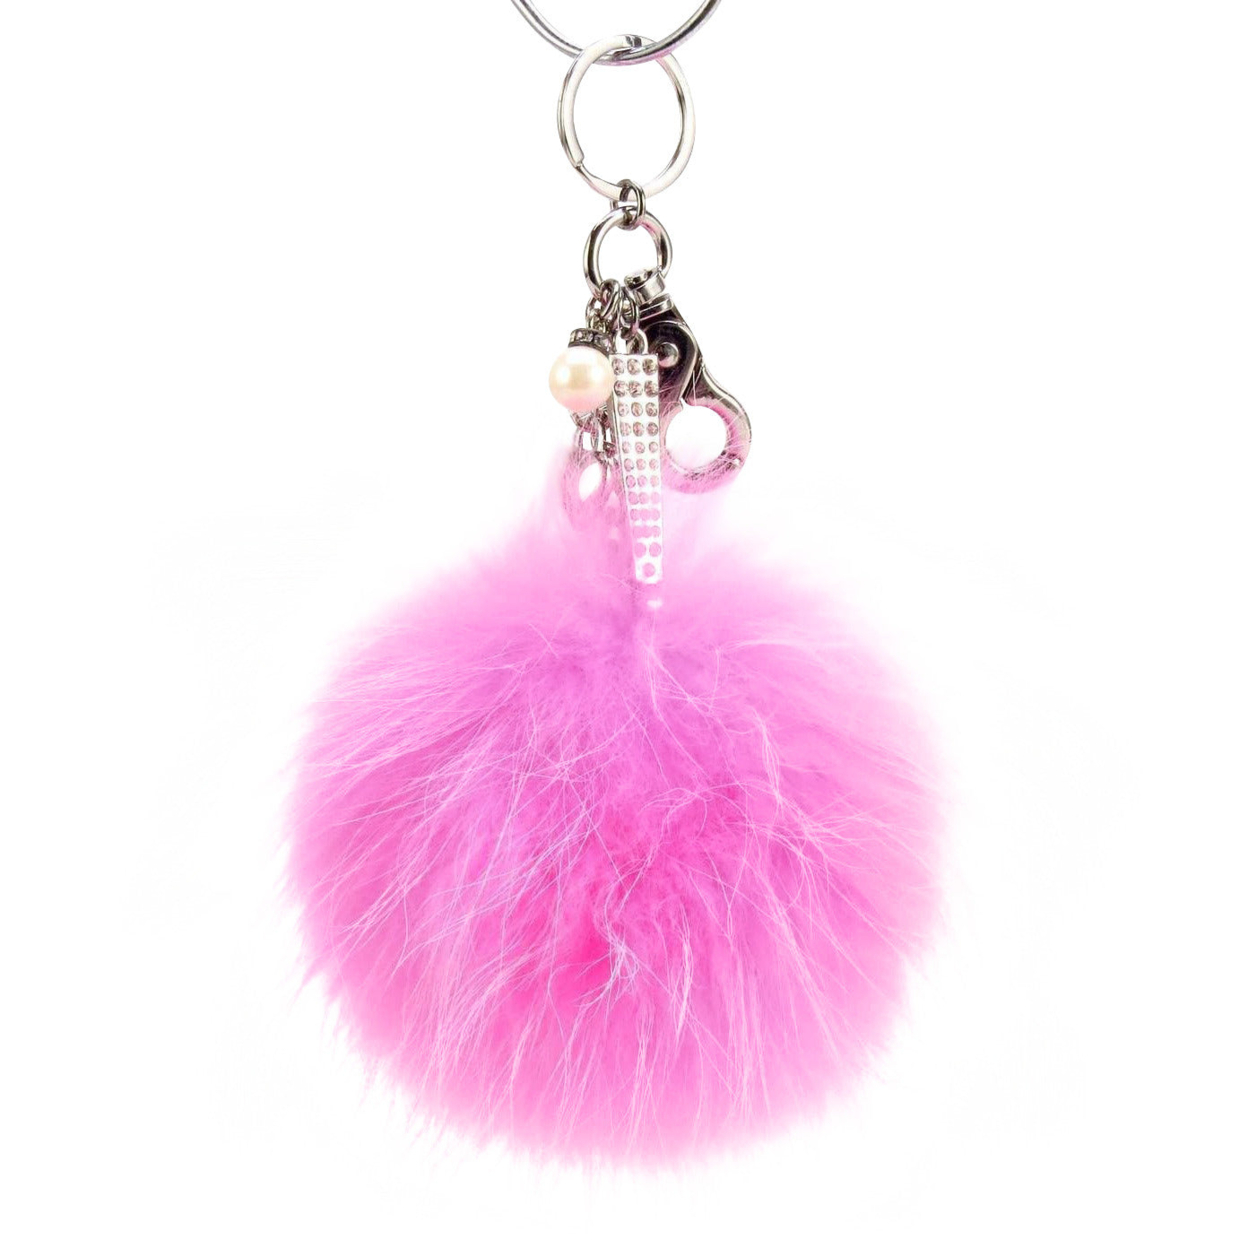 Real Fur Puff Ball Pom-Pom 6 Accessory Dangle Purse Charm - Pink With Silver Hardware